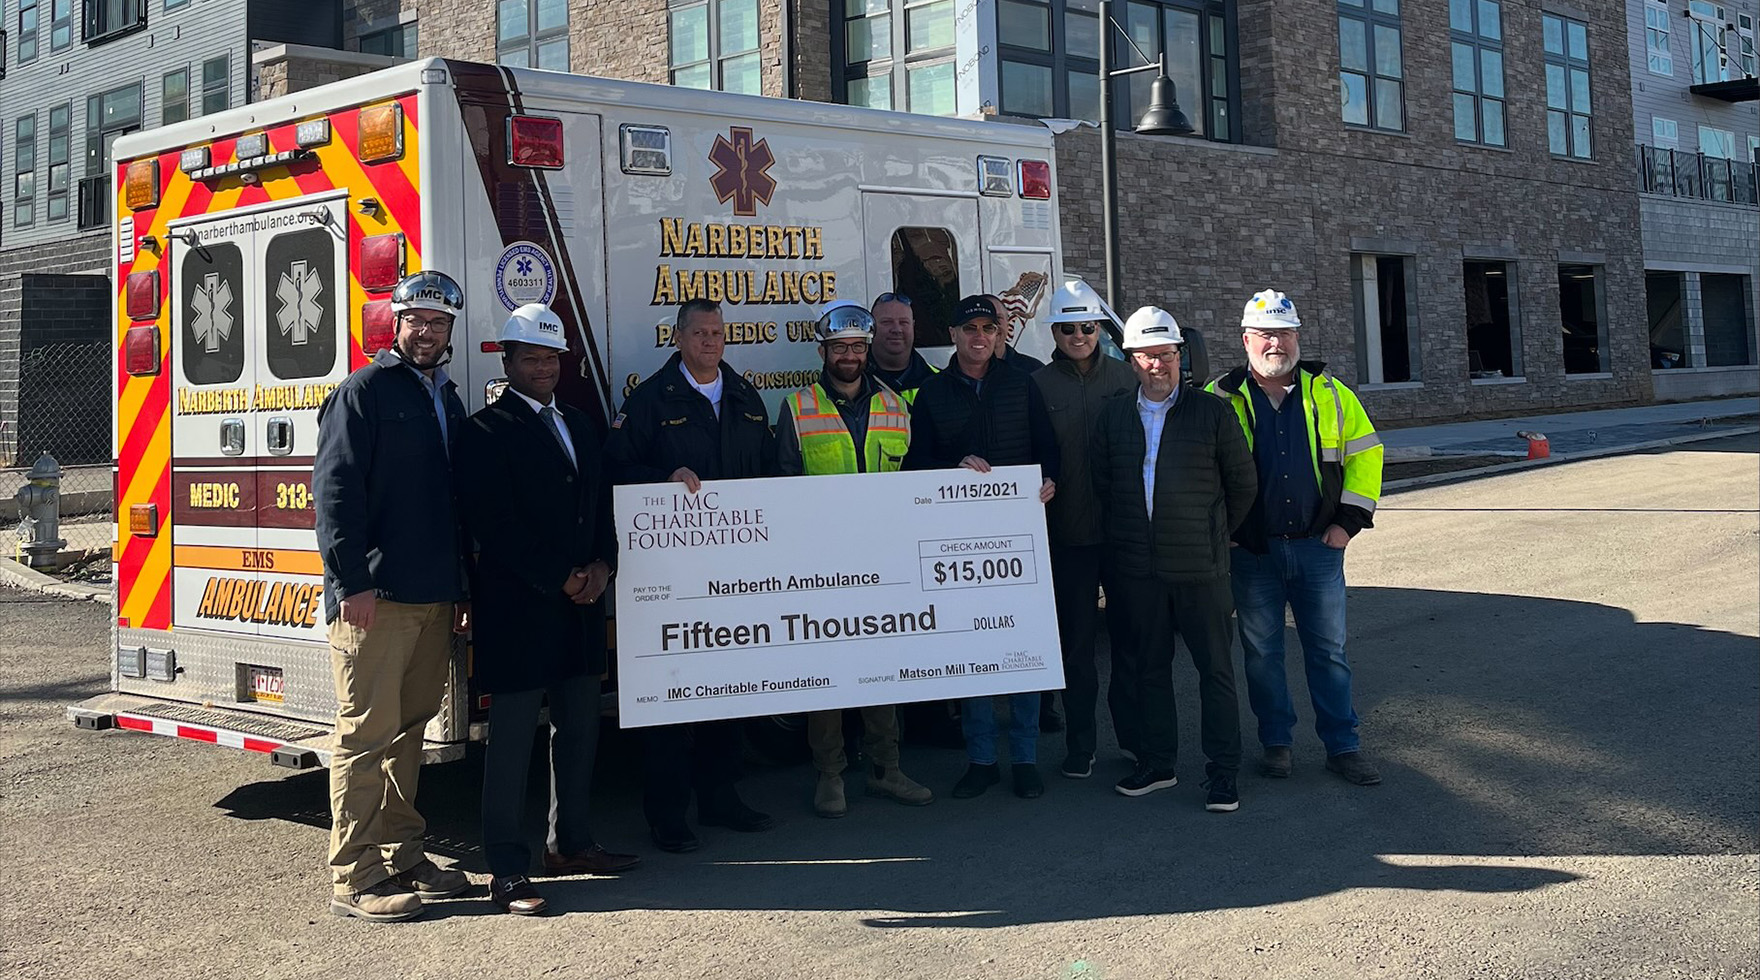 A group of several IMC employees posing with a large donation check in front of an ambulance on a construction site.